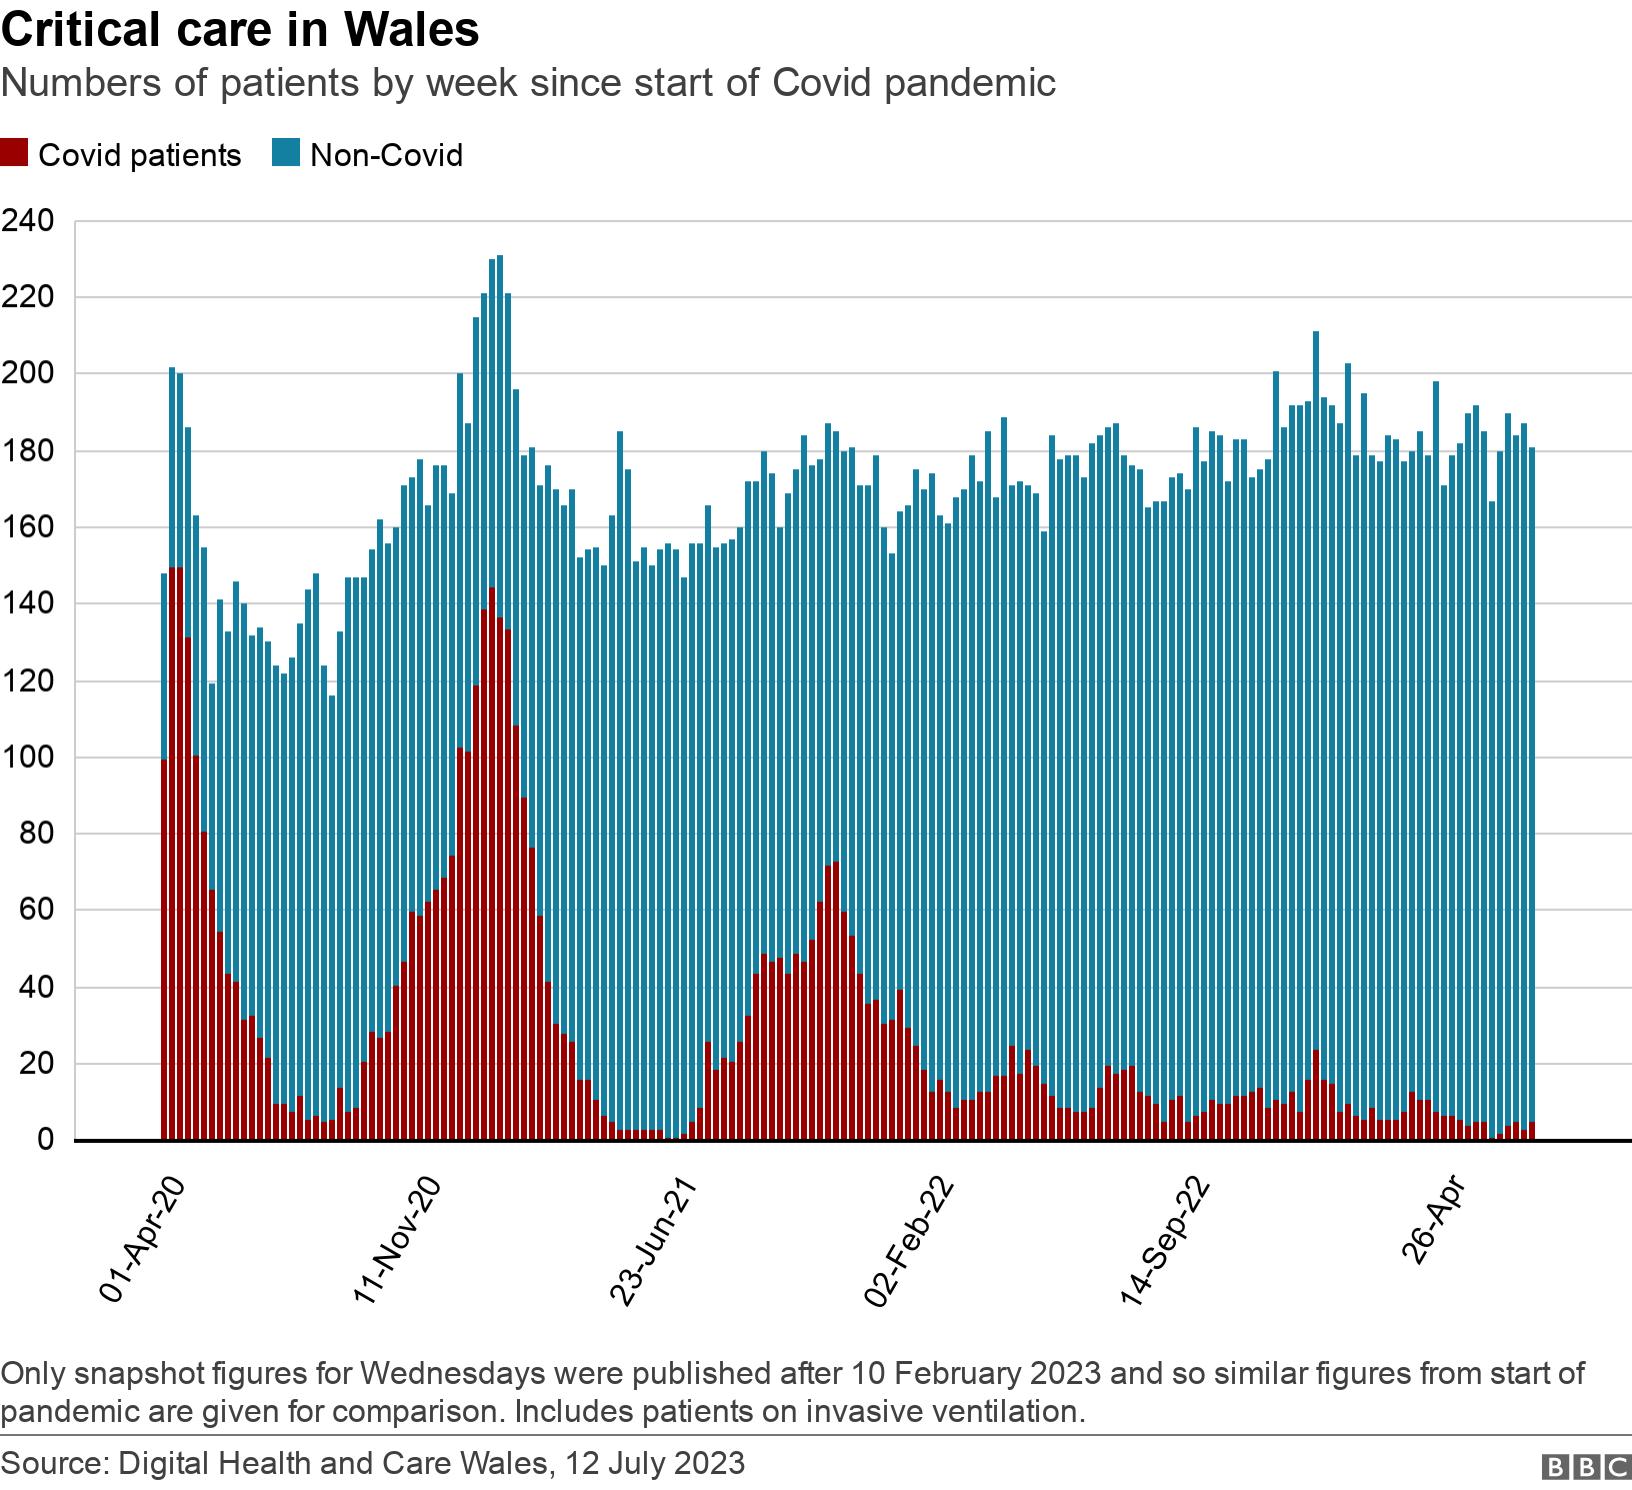 Critical care in Wales. Numbers of patients by week since start of Covid pandemic.  Only snapshot figures for Wednesdays were published  after 10 February 2023 and so similar figures from start of pandemic are given for comparison. Includes patients on invasive ventilation. .